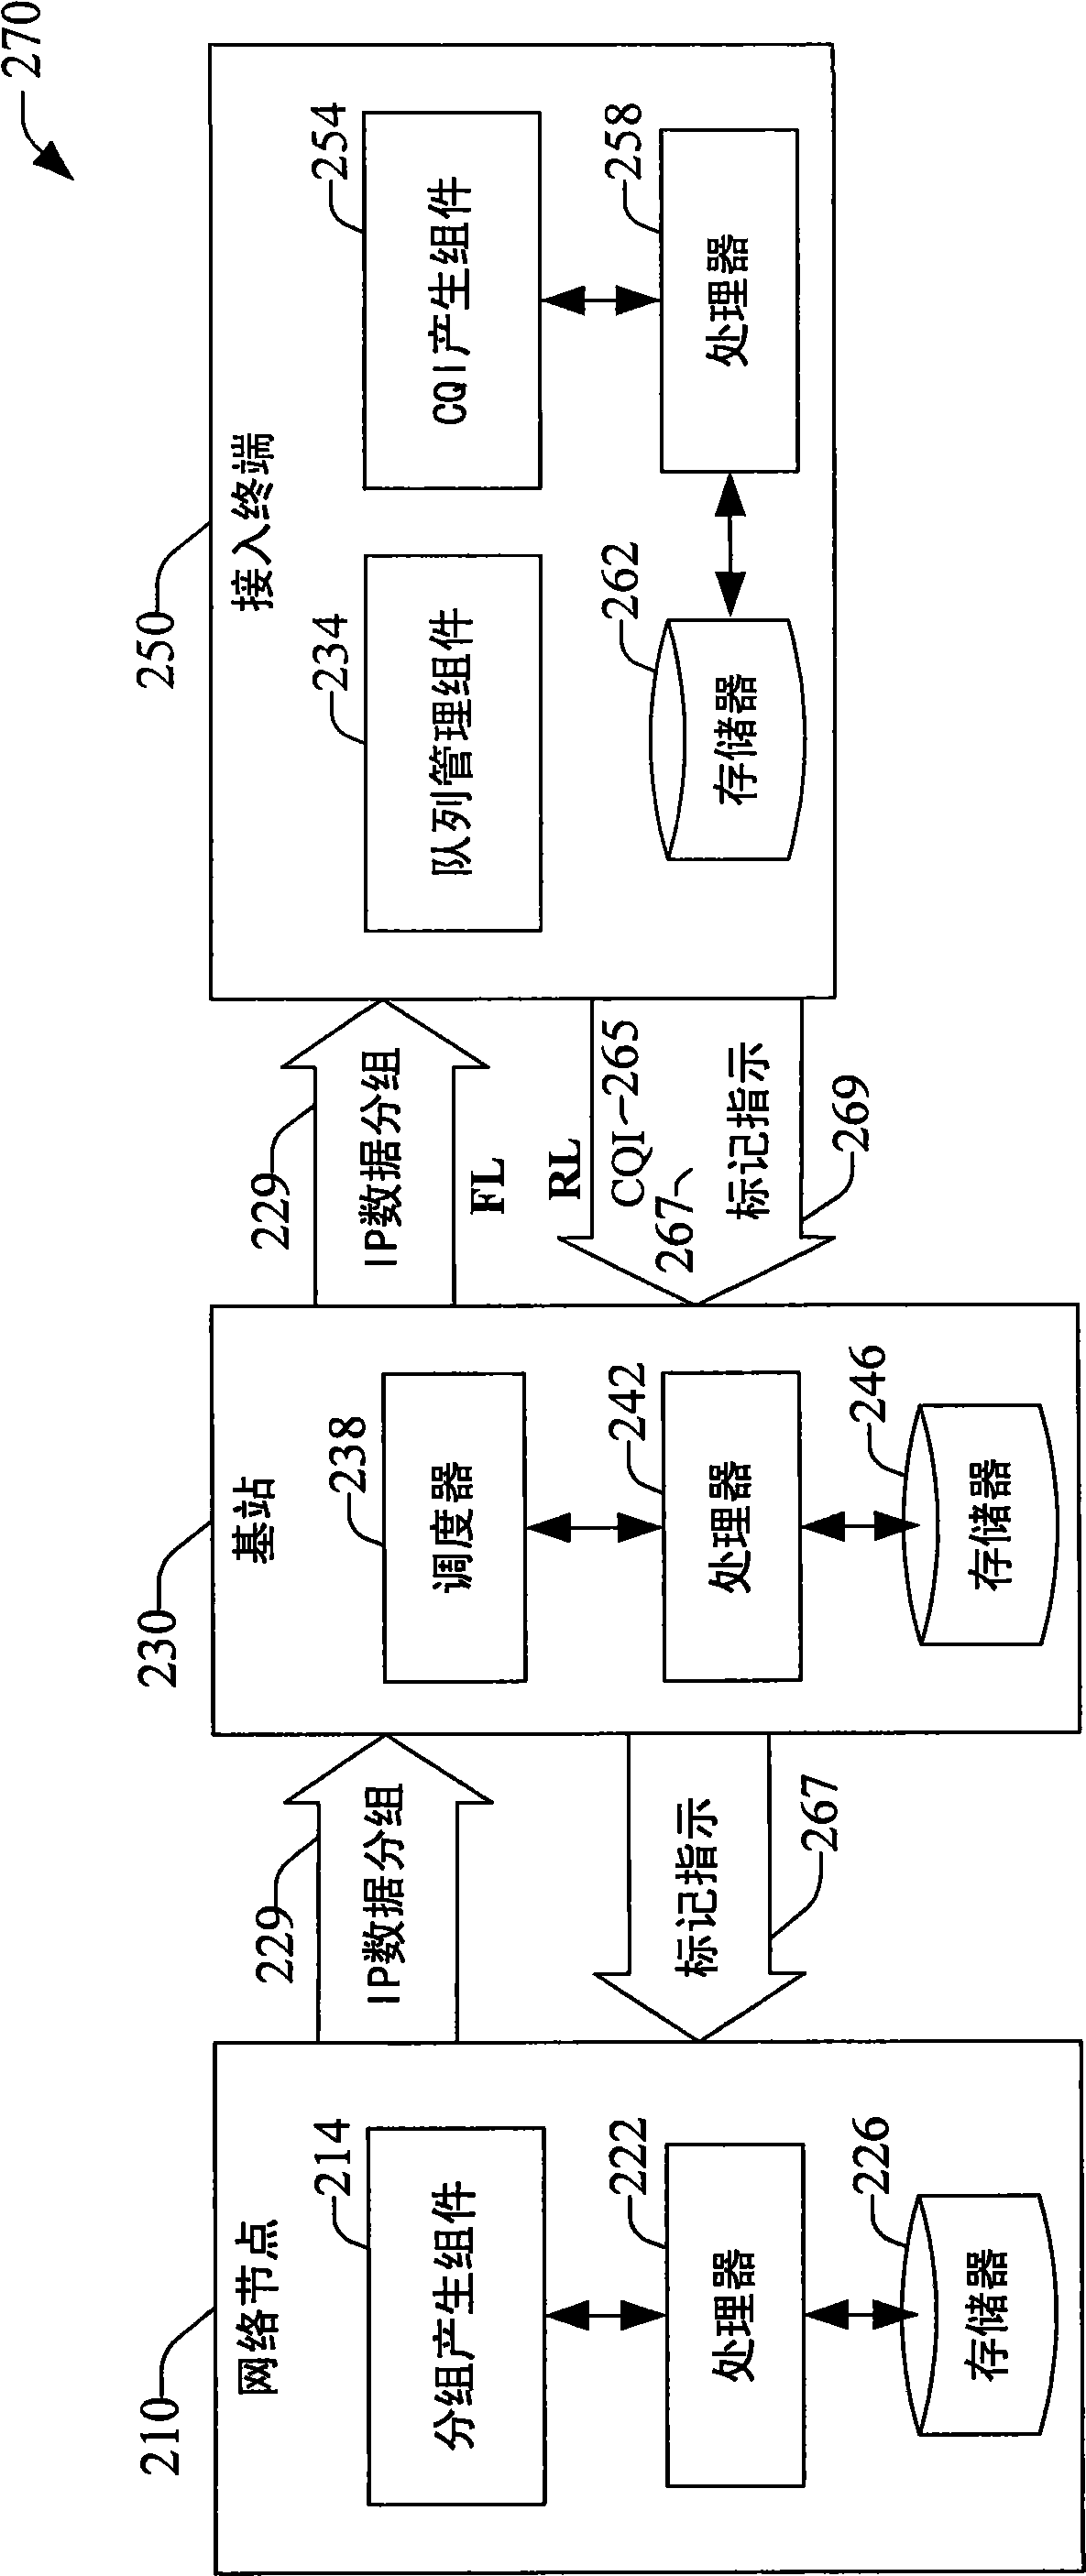 Method and system for reducing backhaul utilization during base station handoff in wireless networks